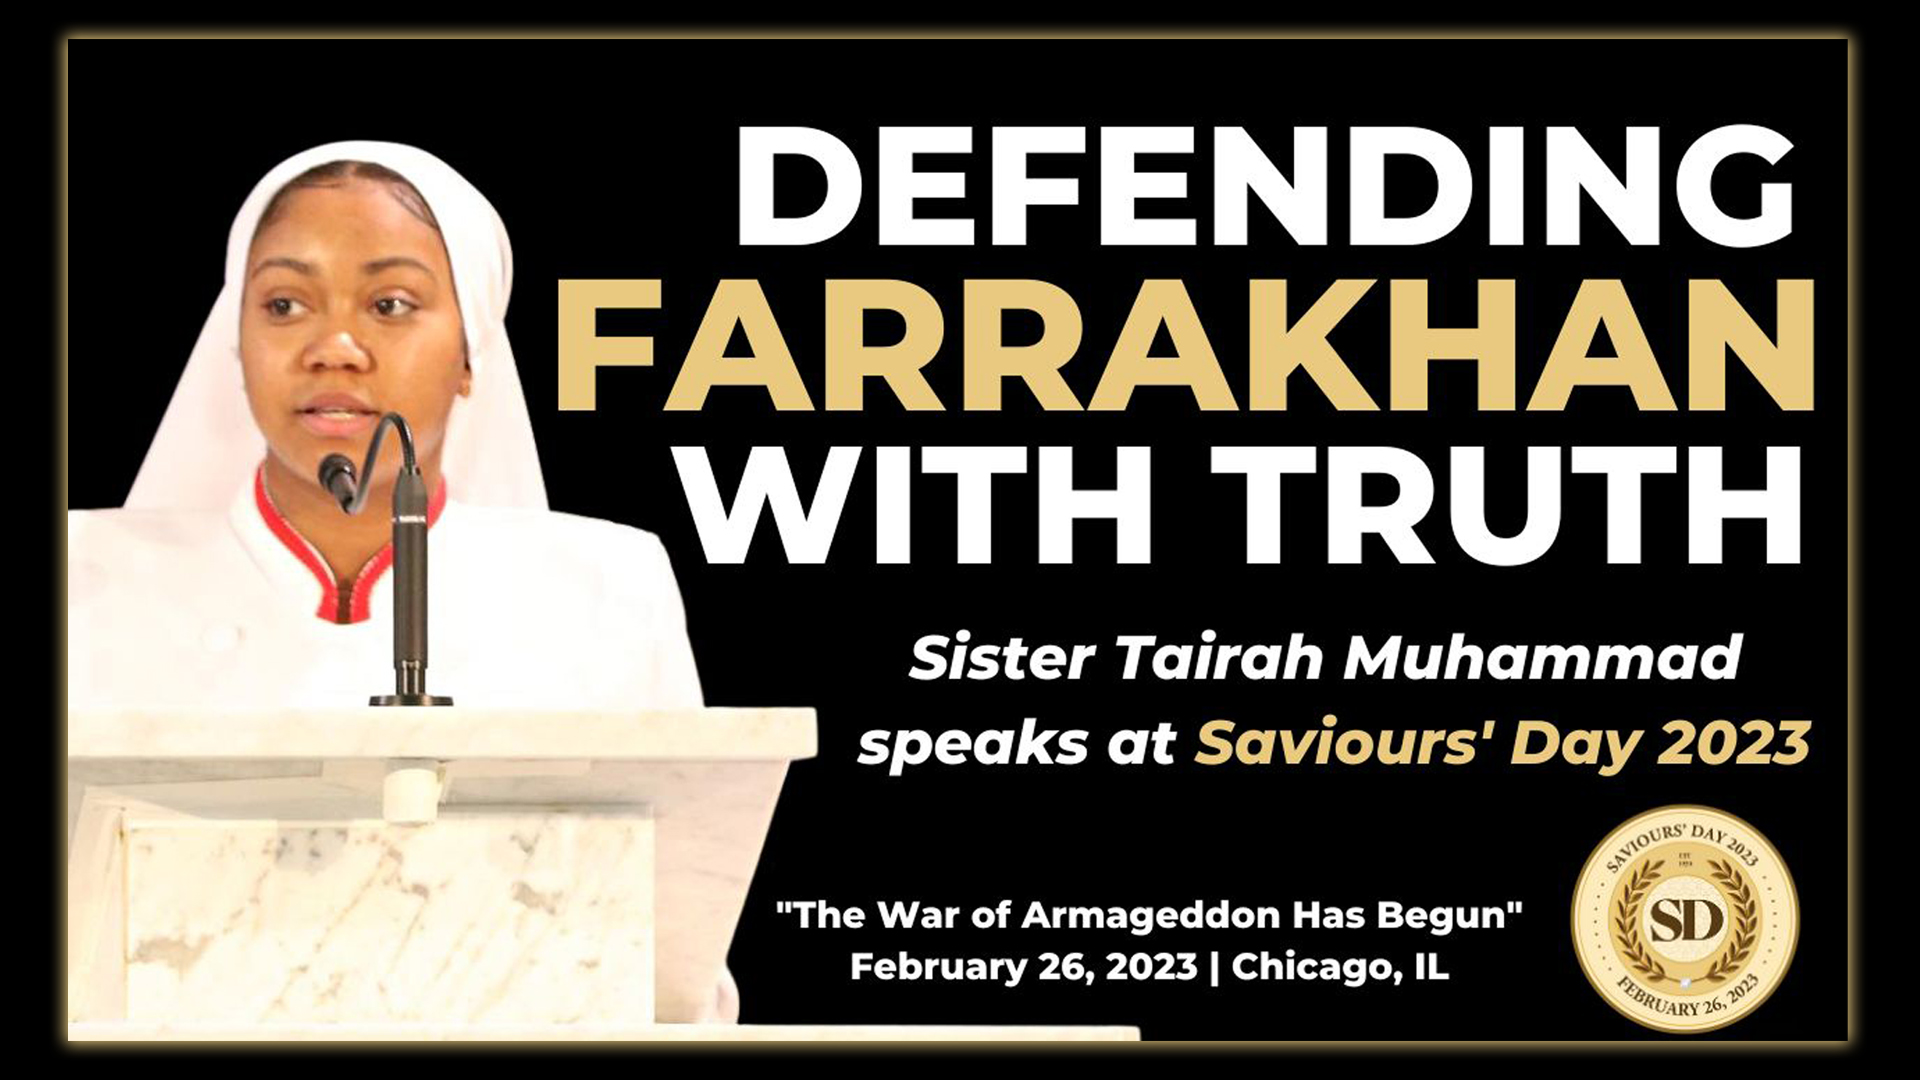 Saviours Day 2023: Defending Farrakhan With Truth